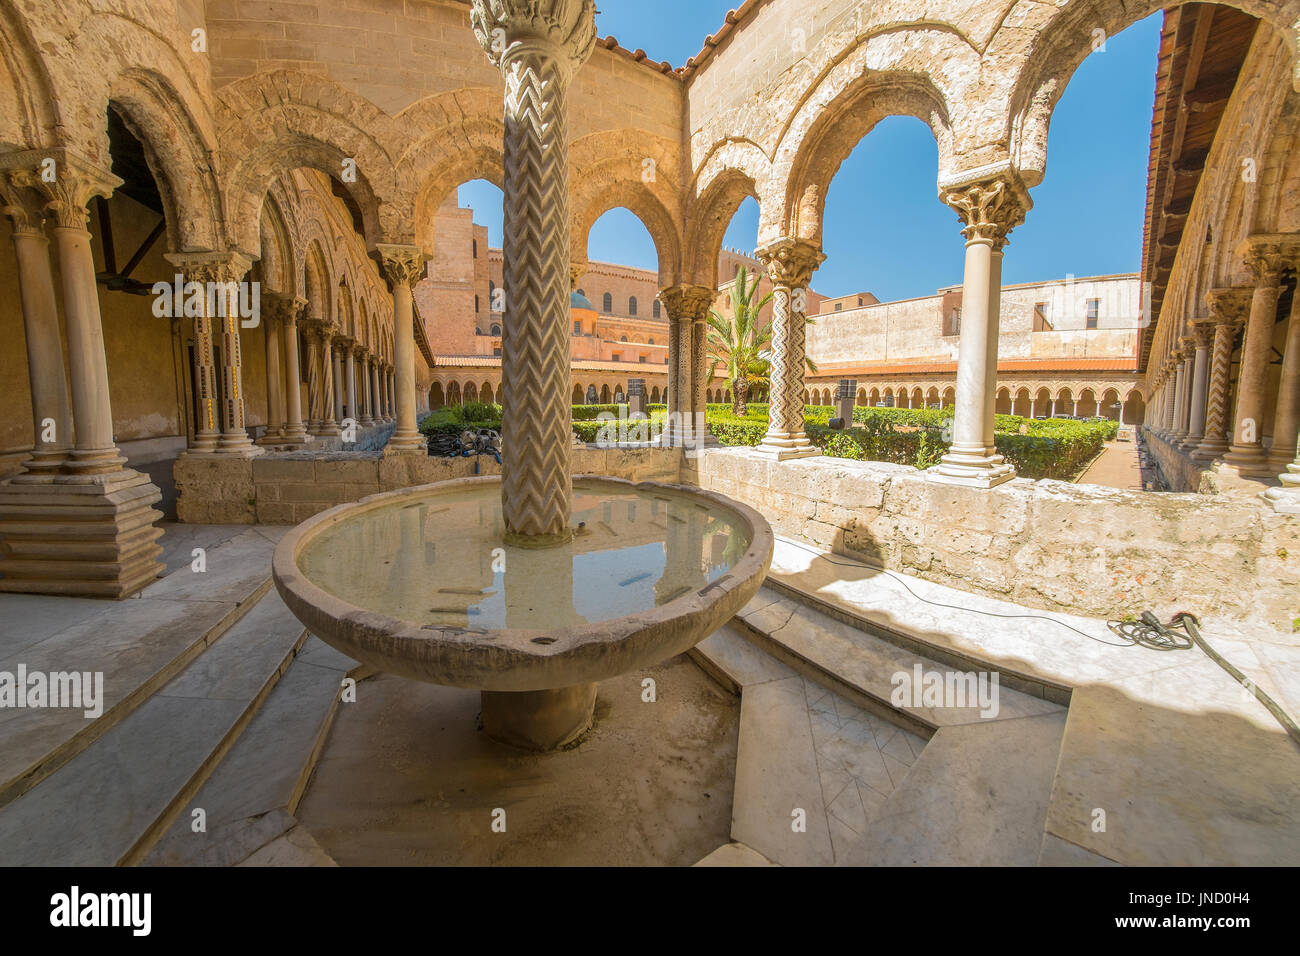 An arabic style fountain in the Abbey of Monreale, Palermo, Sicily. Stock Photo